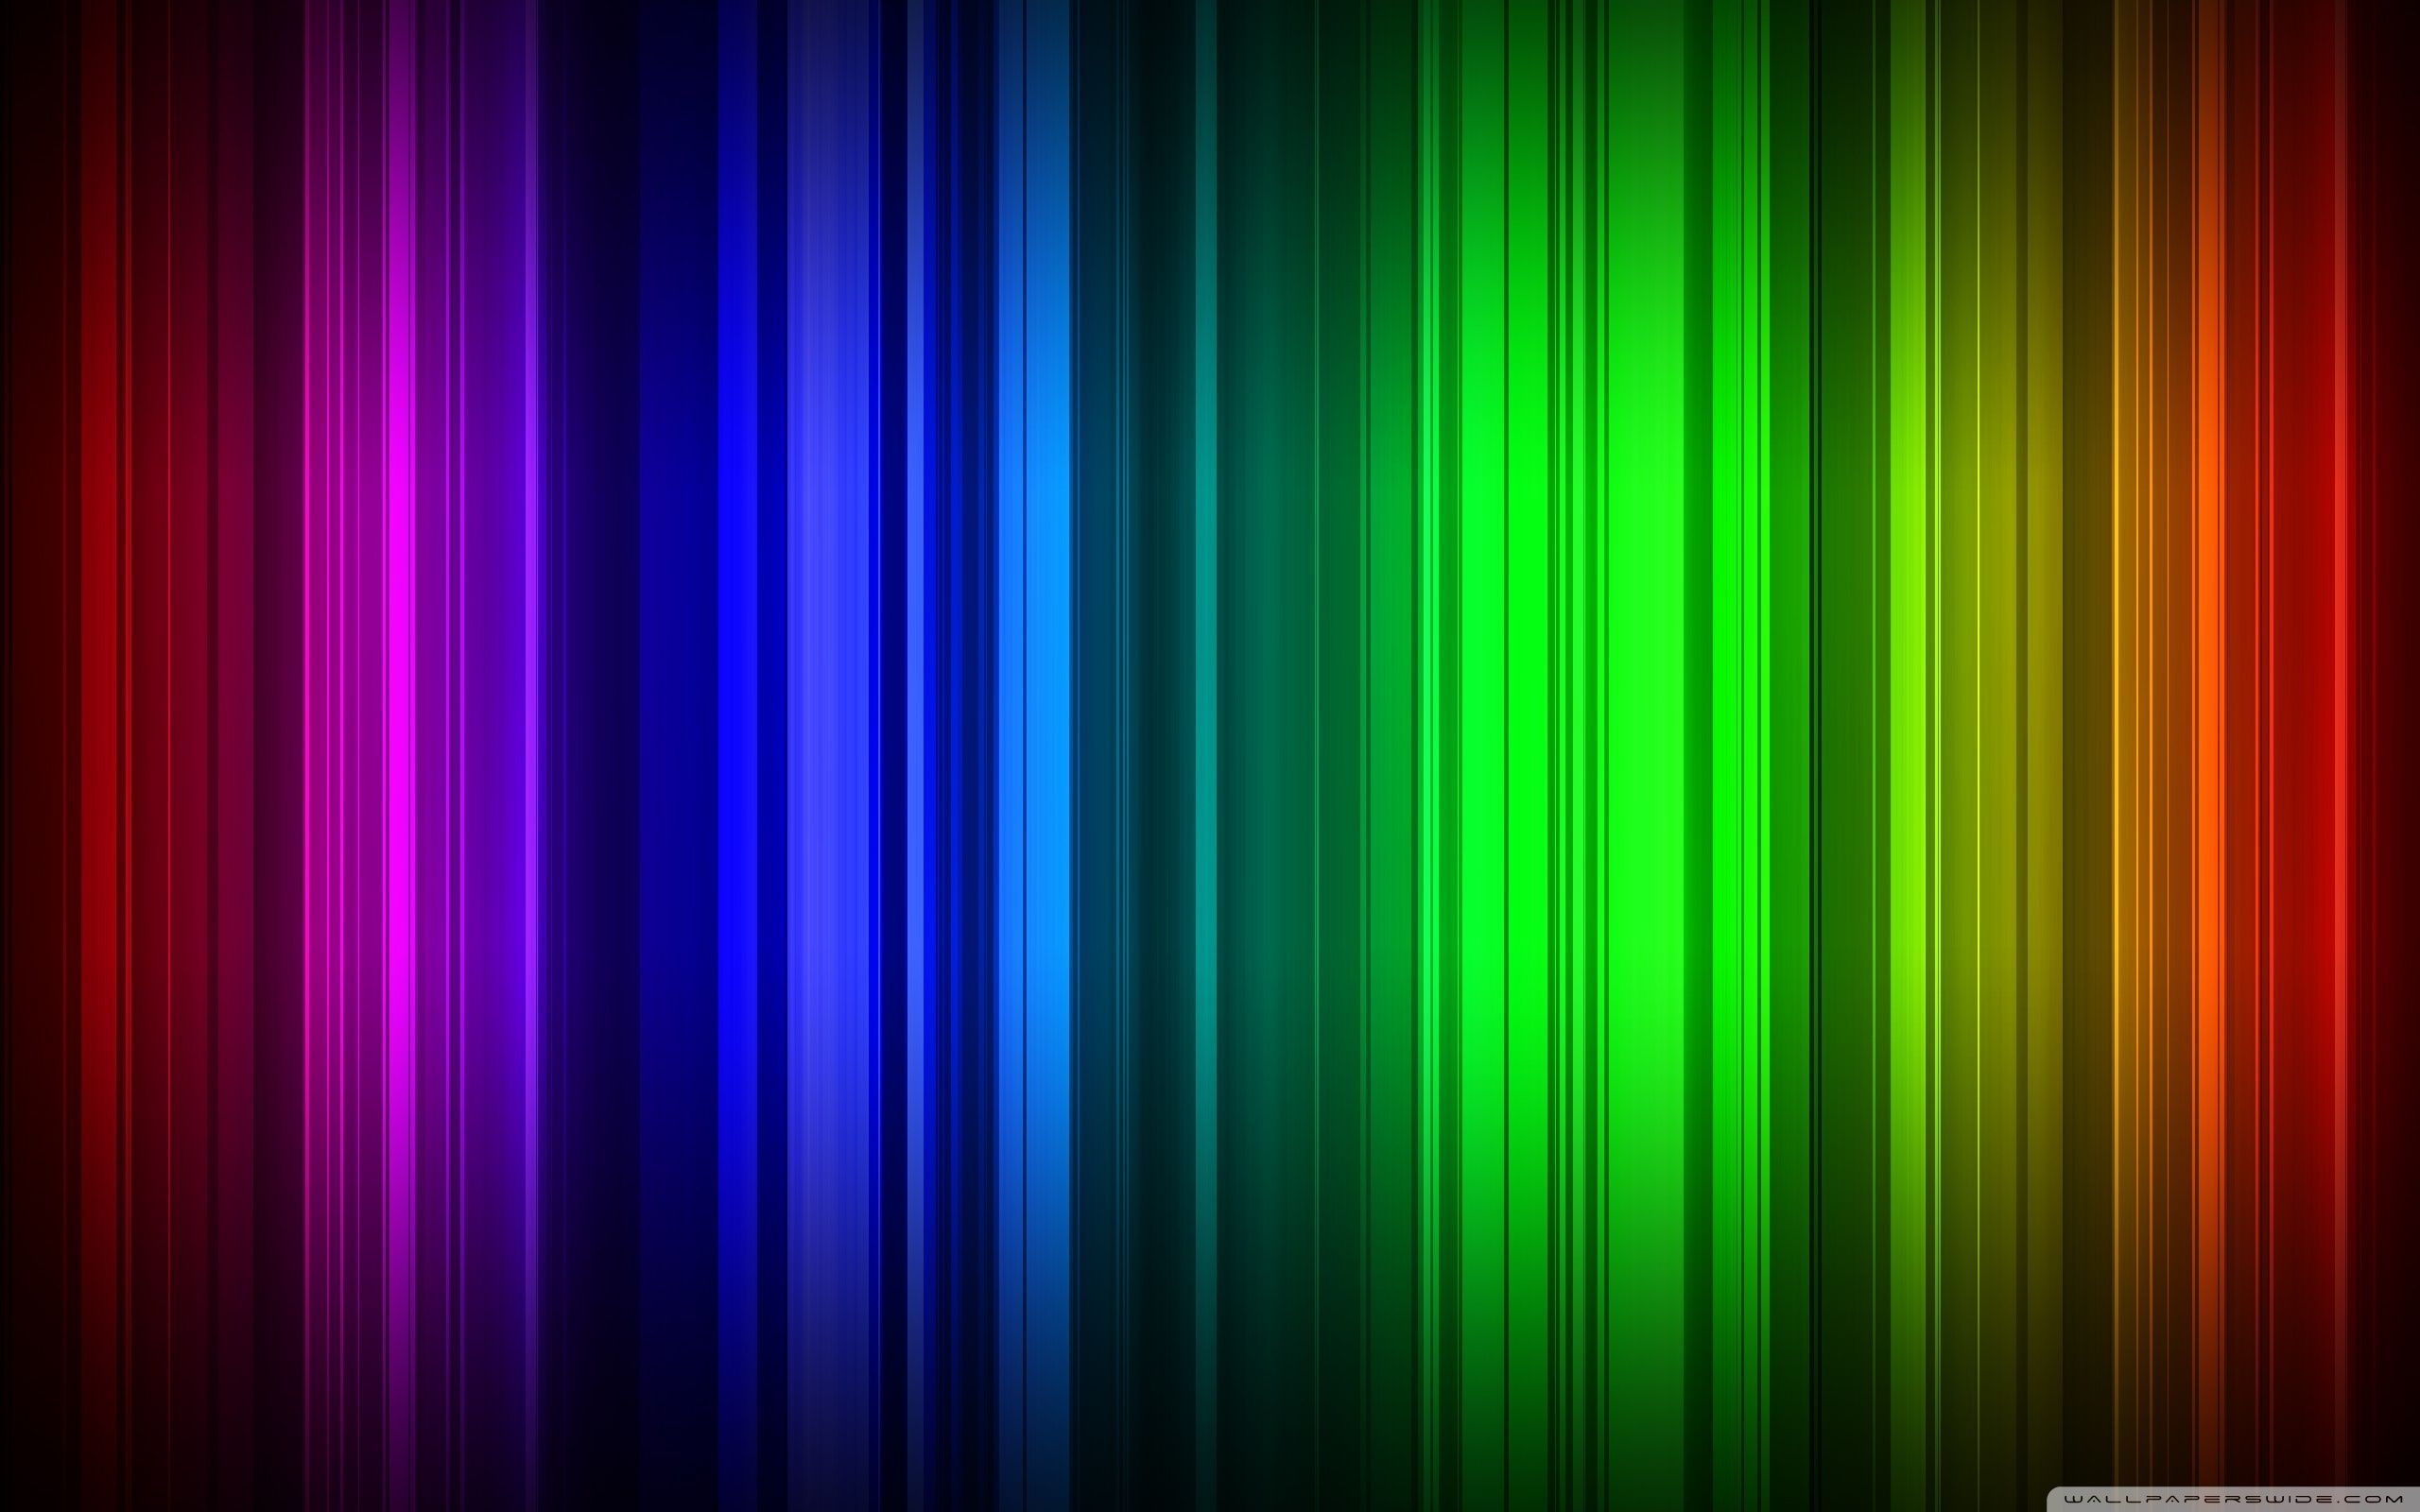 All Colors Ultra HD Desktop Background Wallpaper for 4K UHD TV, Multi Display, Dual Monitor, Tablet